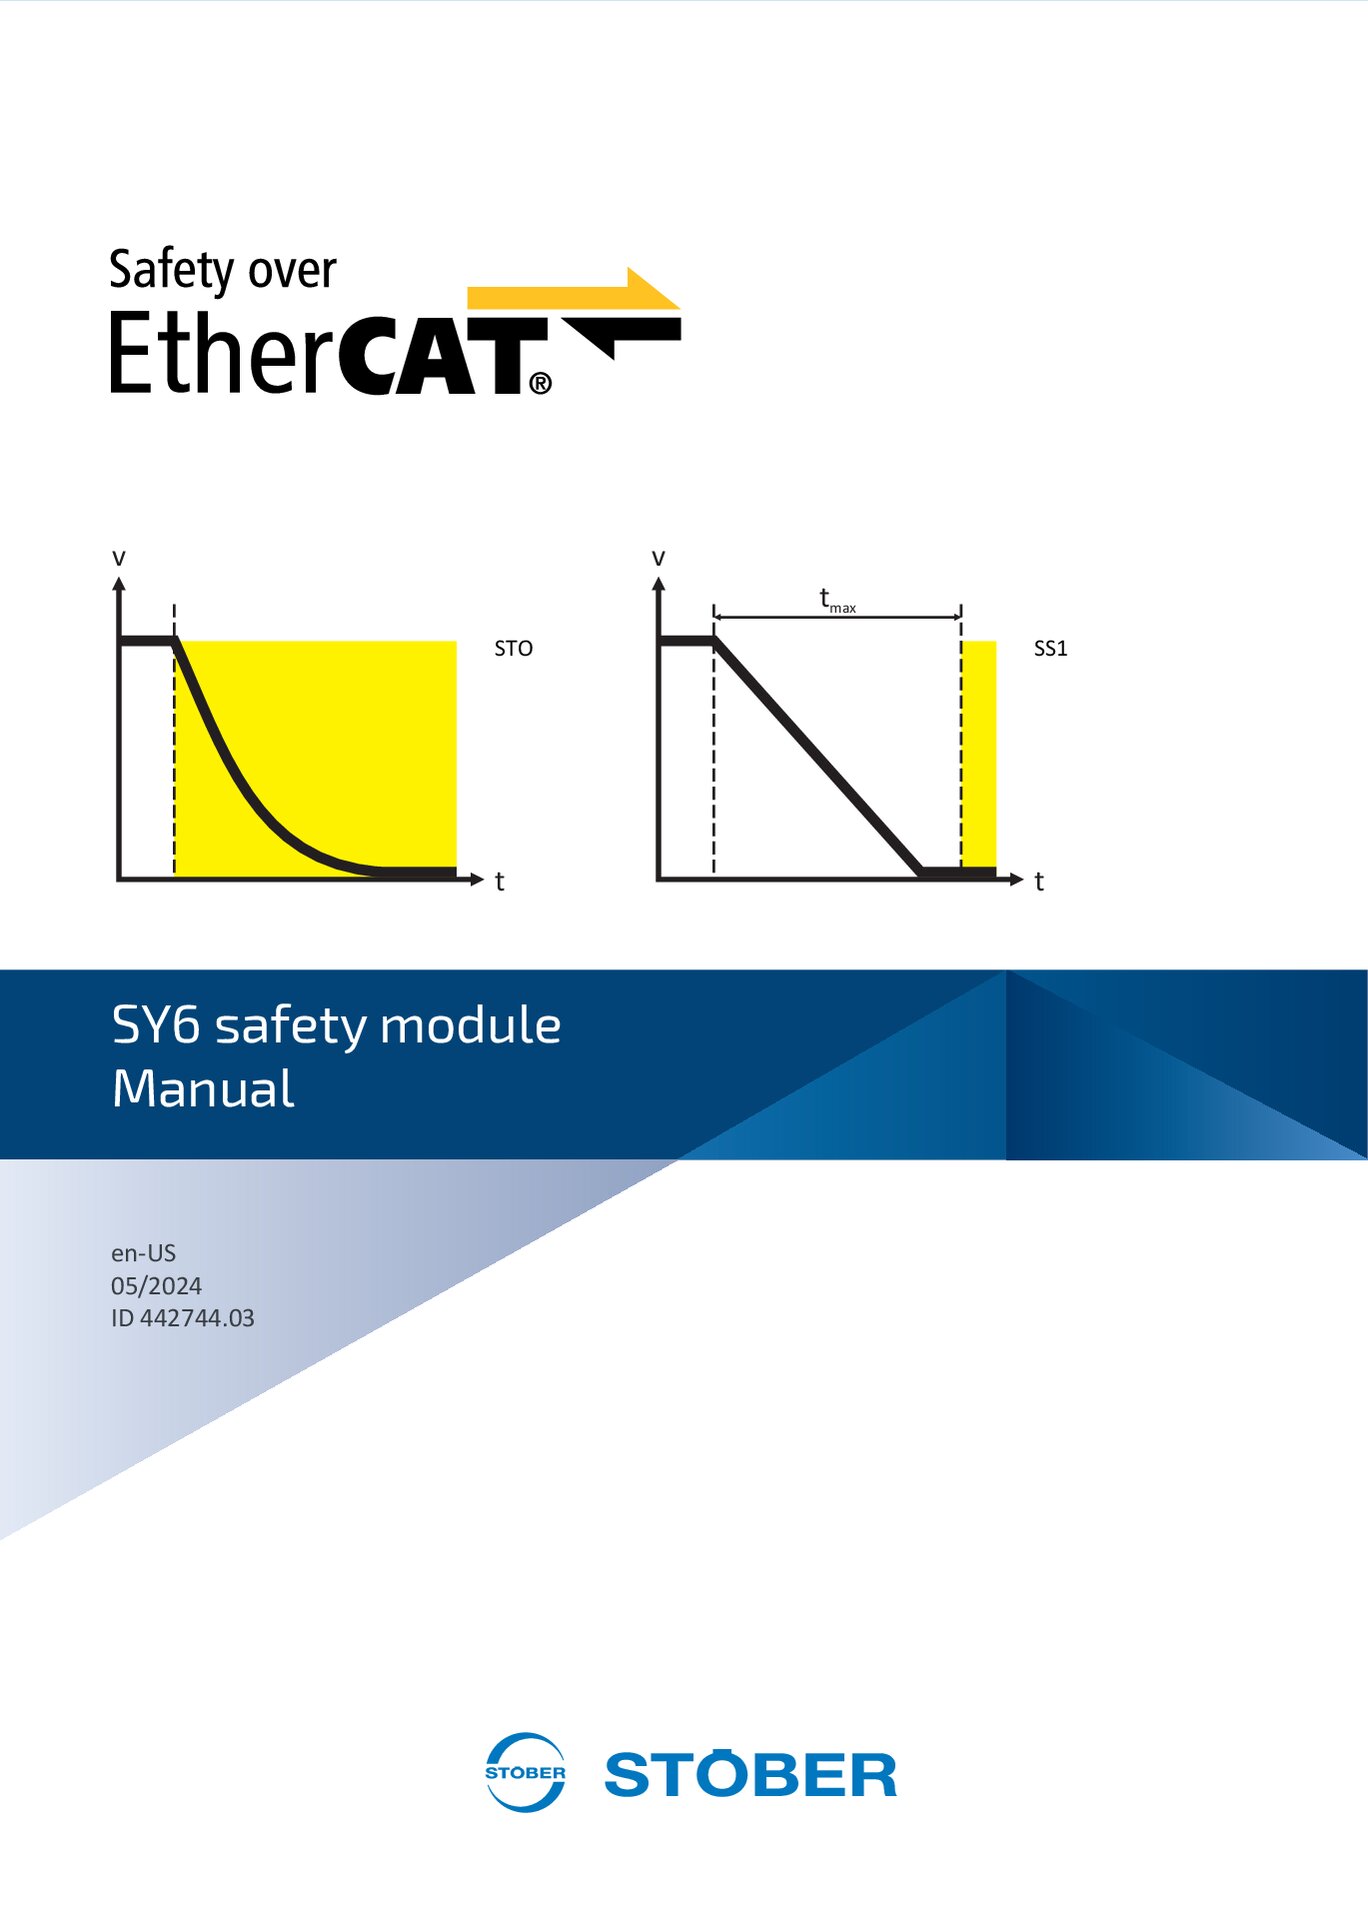 Manual SY6 safety technology